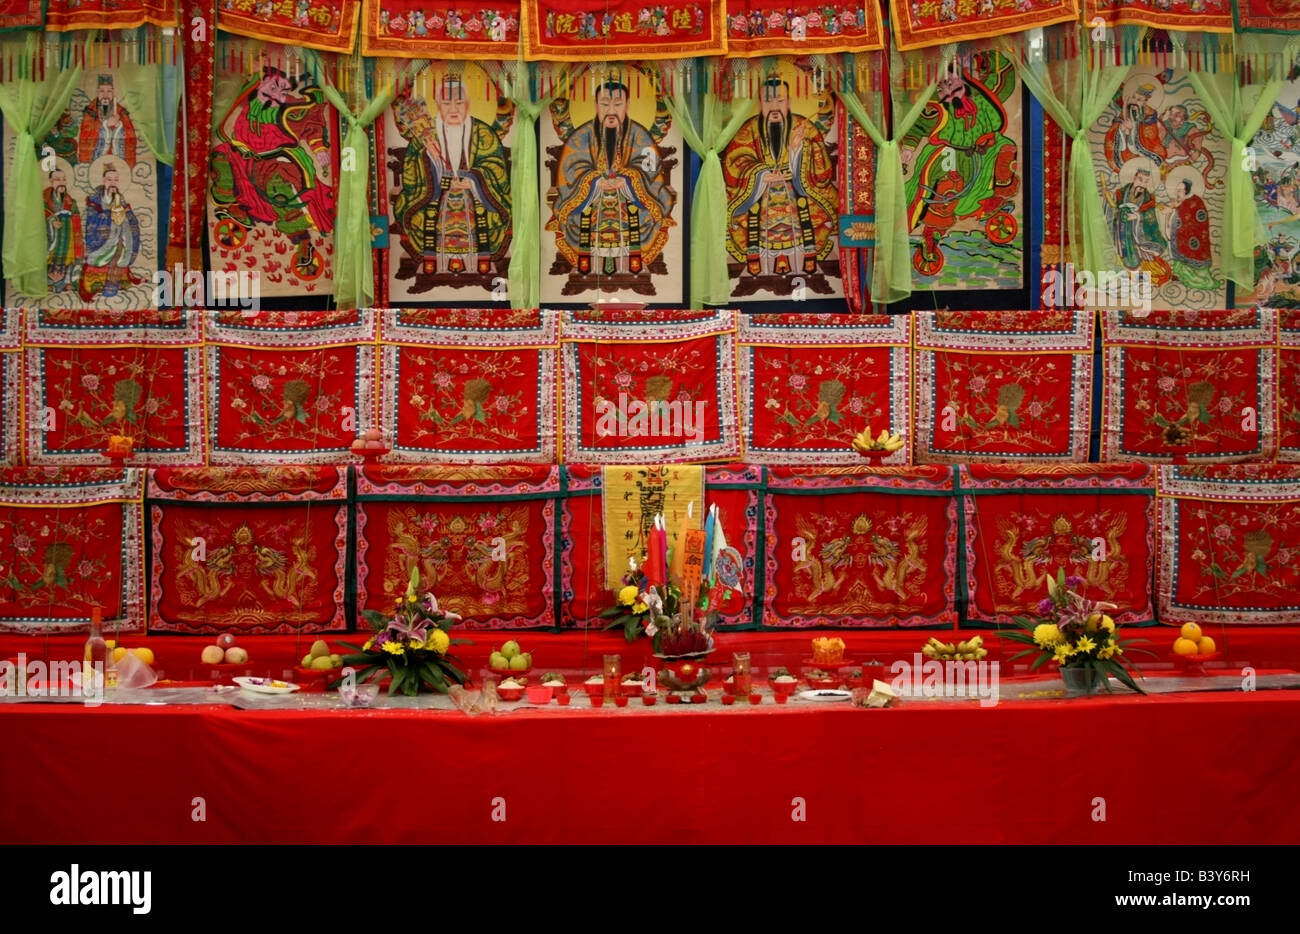 Alter of offerings with the Three Pure Ones and taoist deities, Taoist festival of the hungry ghosts, Singapore, South East Asia Stock Photo